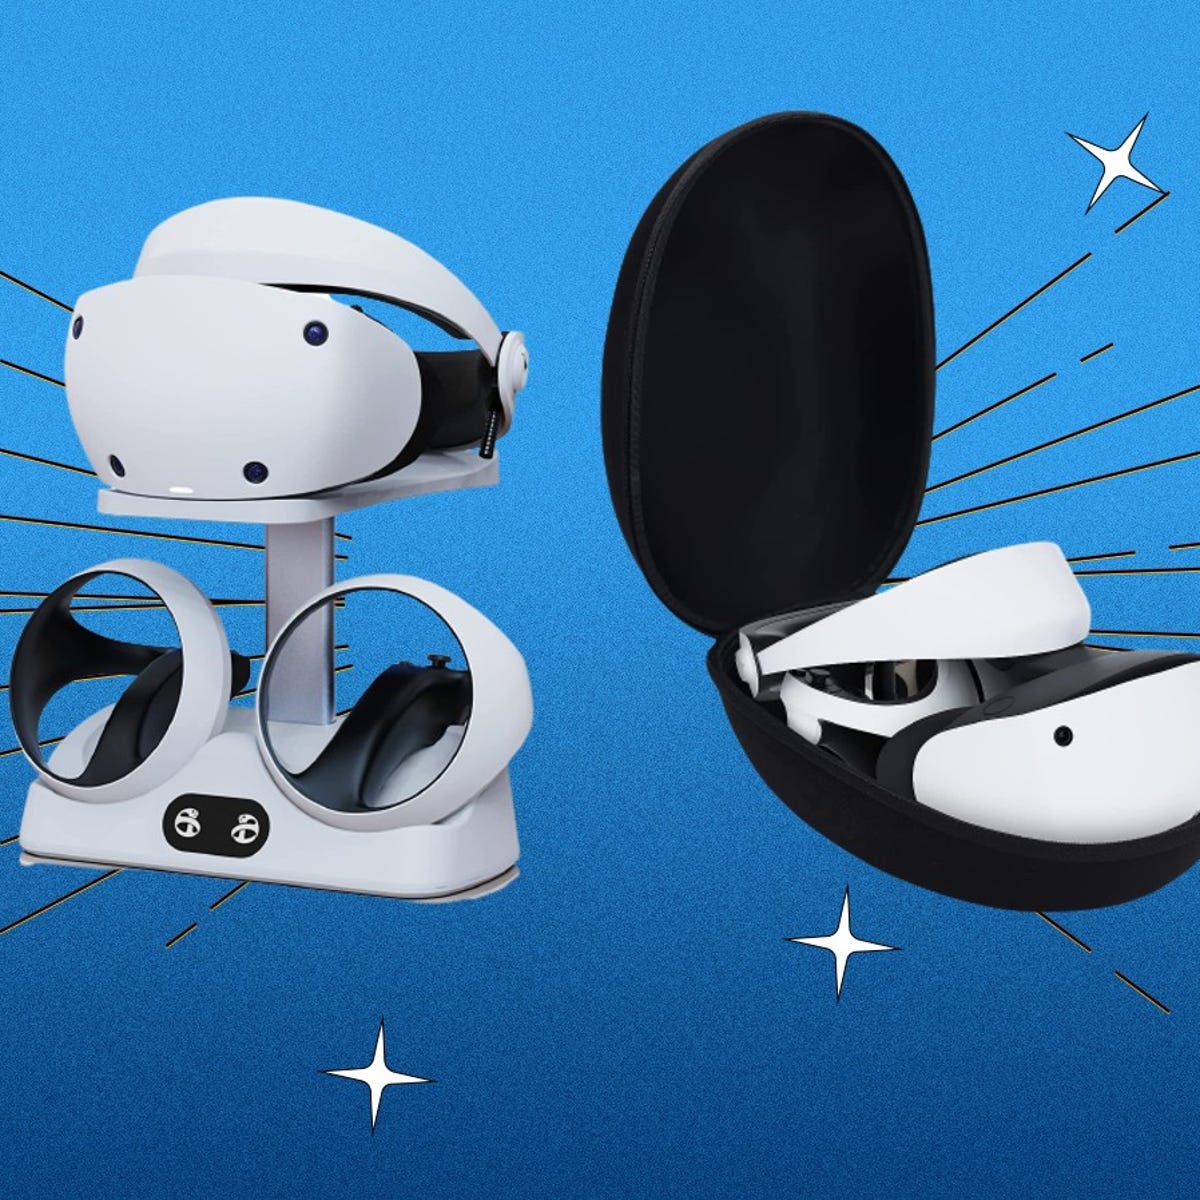 PSVR 2 Accessories Available to Buy Right Now - CNET